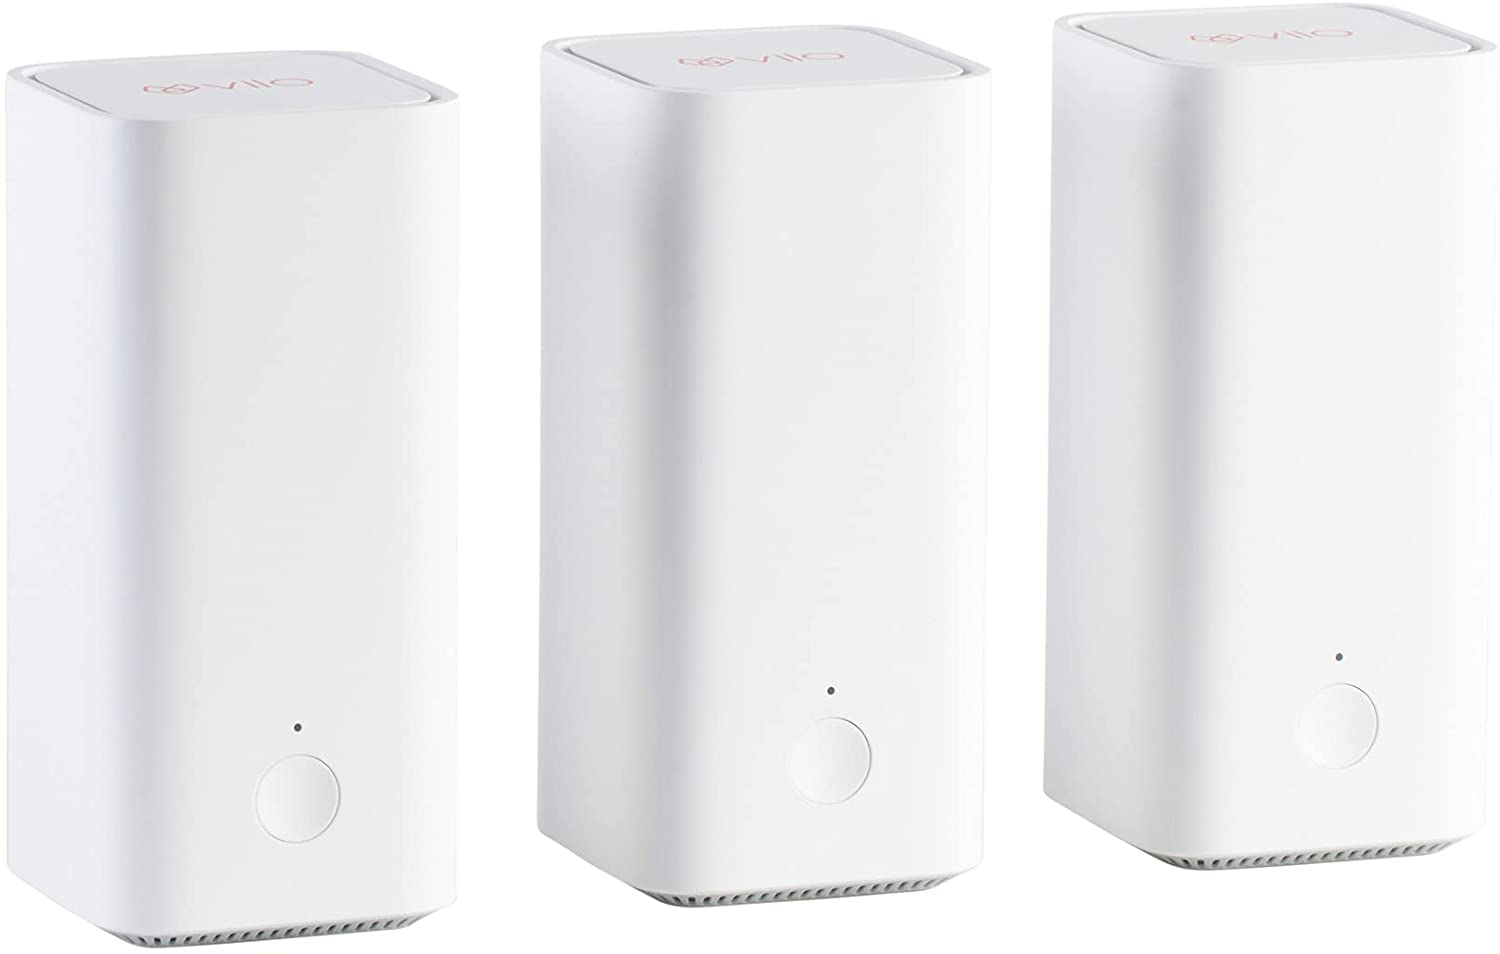 VLWF01-3PK: Vilo Mesh Wi-Fi System Dual Band AC1200 Coverage Up to 4,500 sq ft (3-Pack) with 3 Gigabit Ethernet Ports and App-Managed Parental Controls, Wi-Fi Router and Extender Replacement